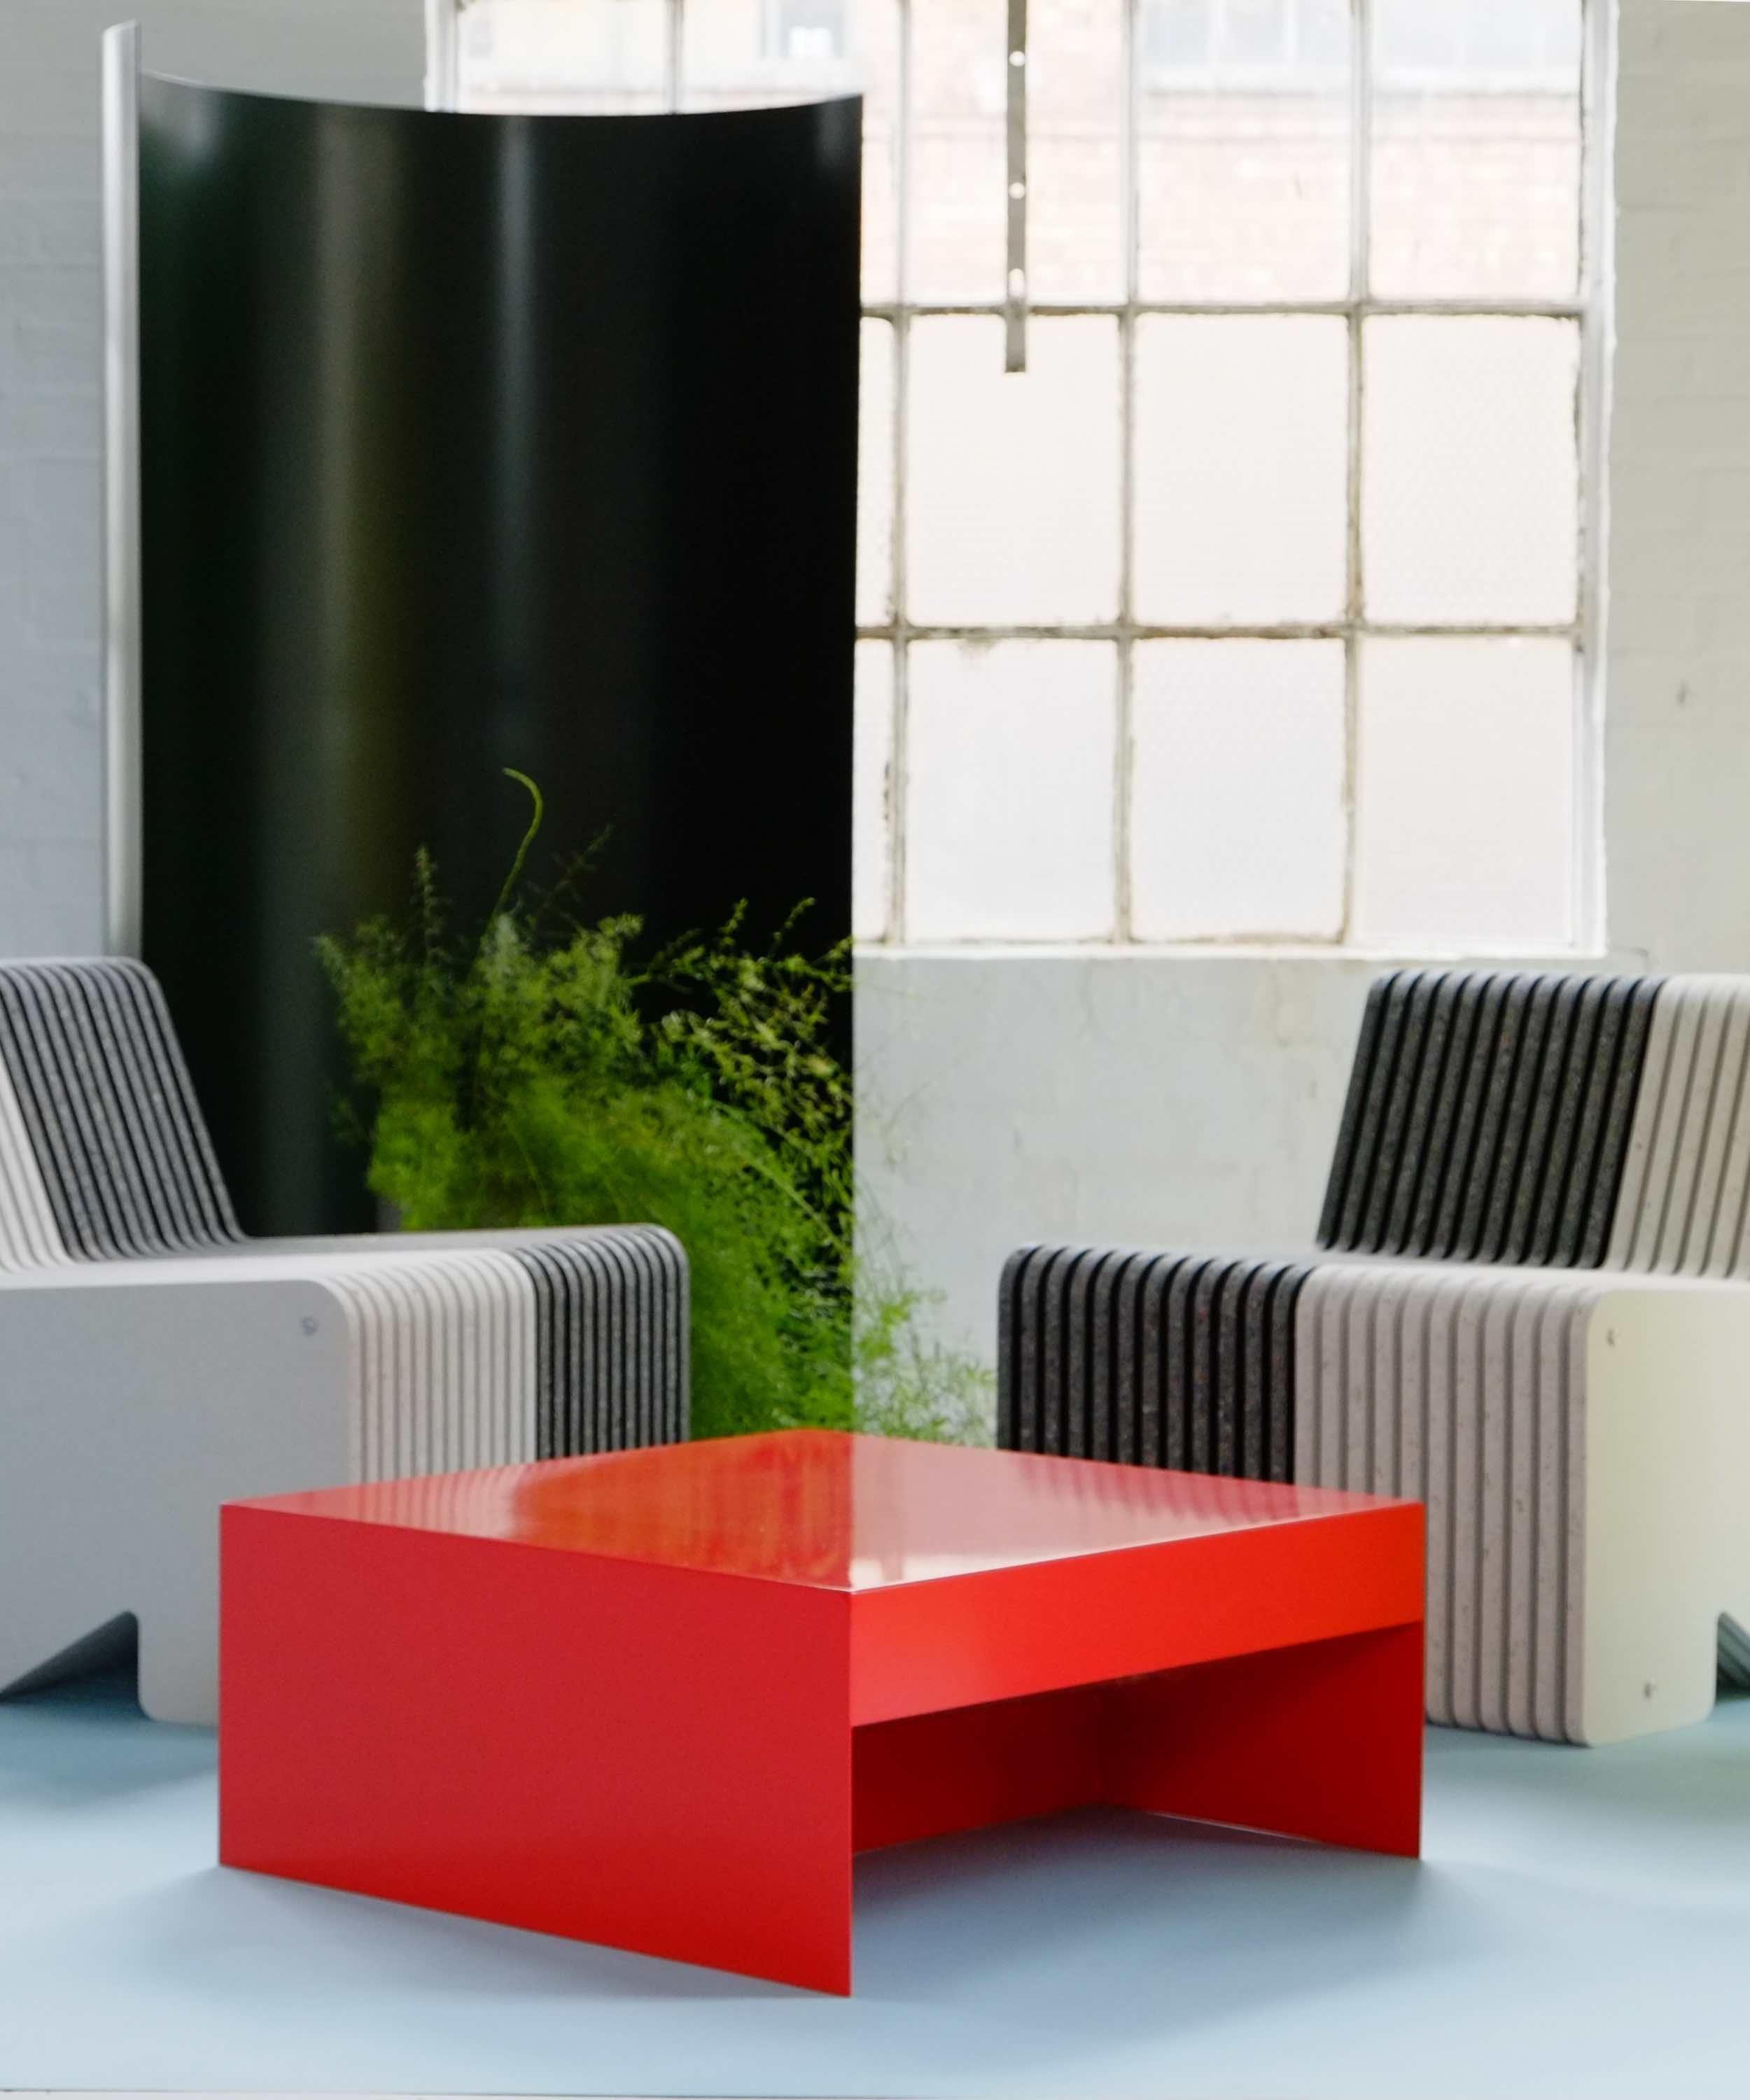 Powder-Coated Red Single Form Square Aluminium Coffee Table - Indoor / Outdoor / Customisable For Sale